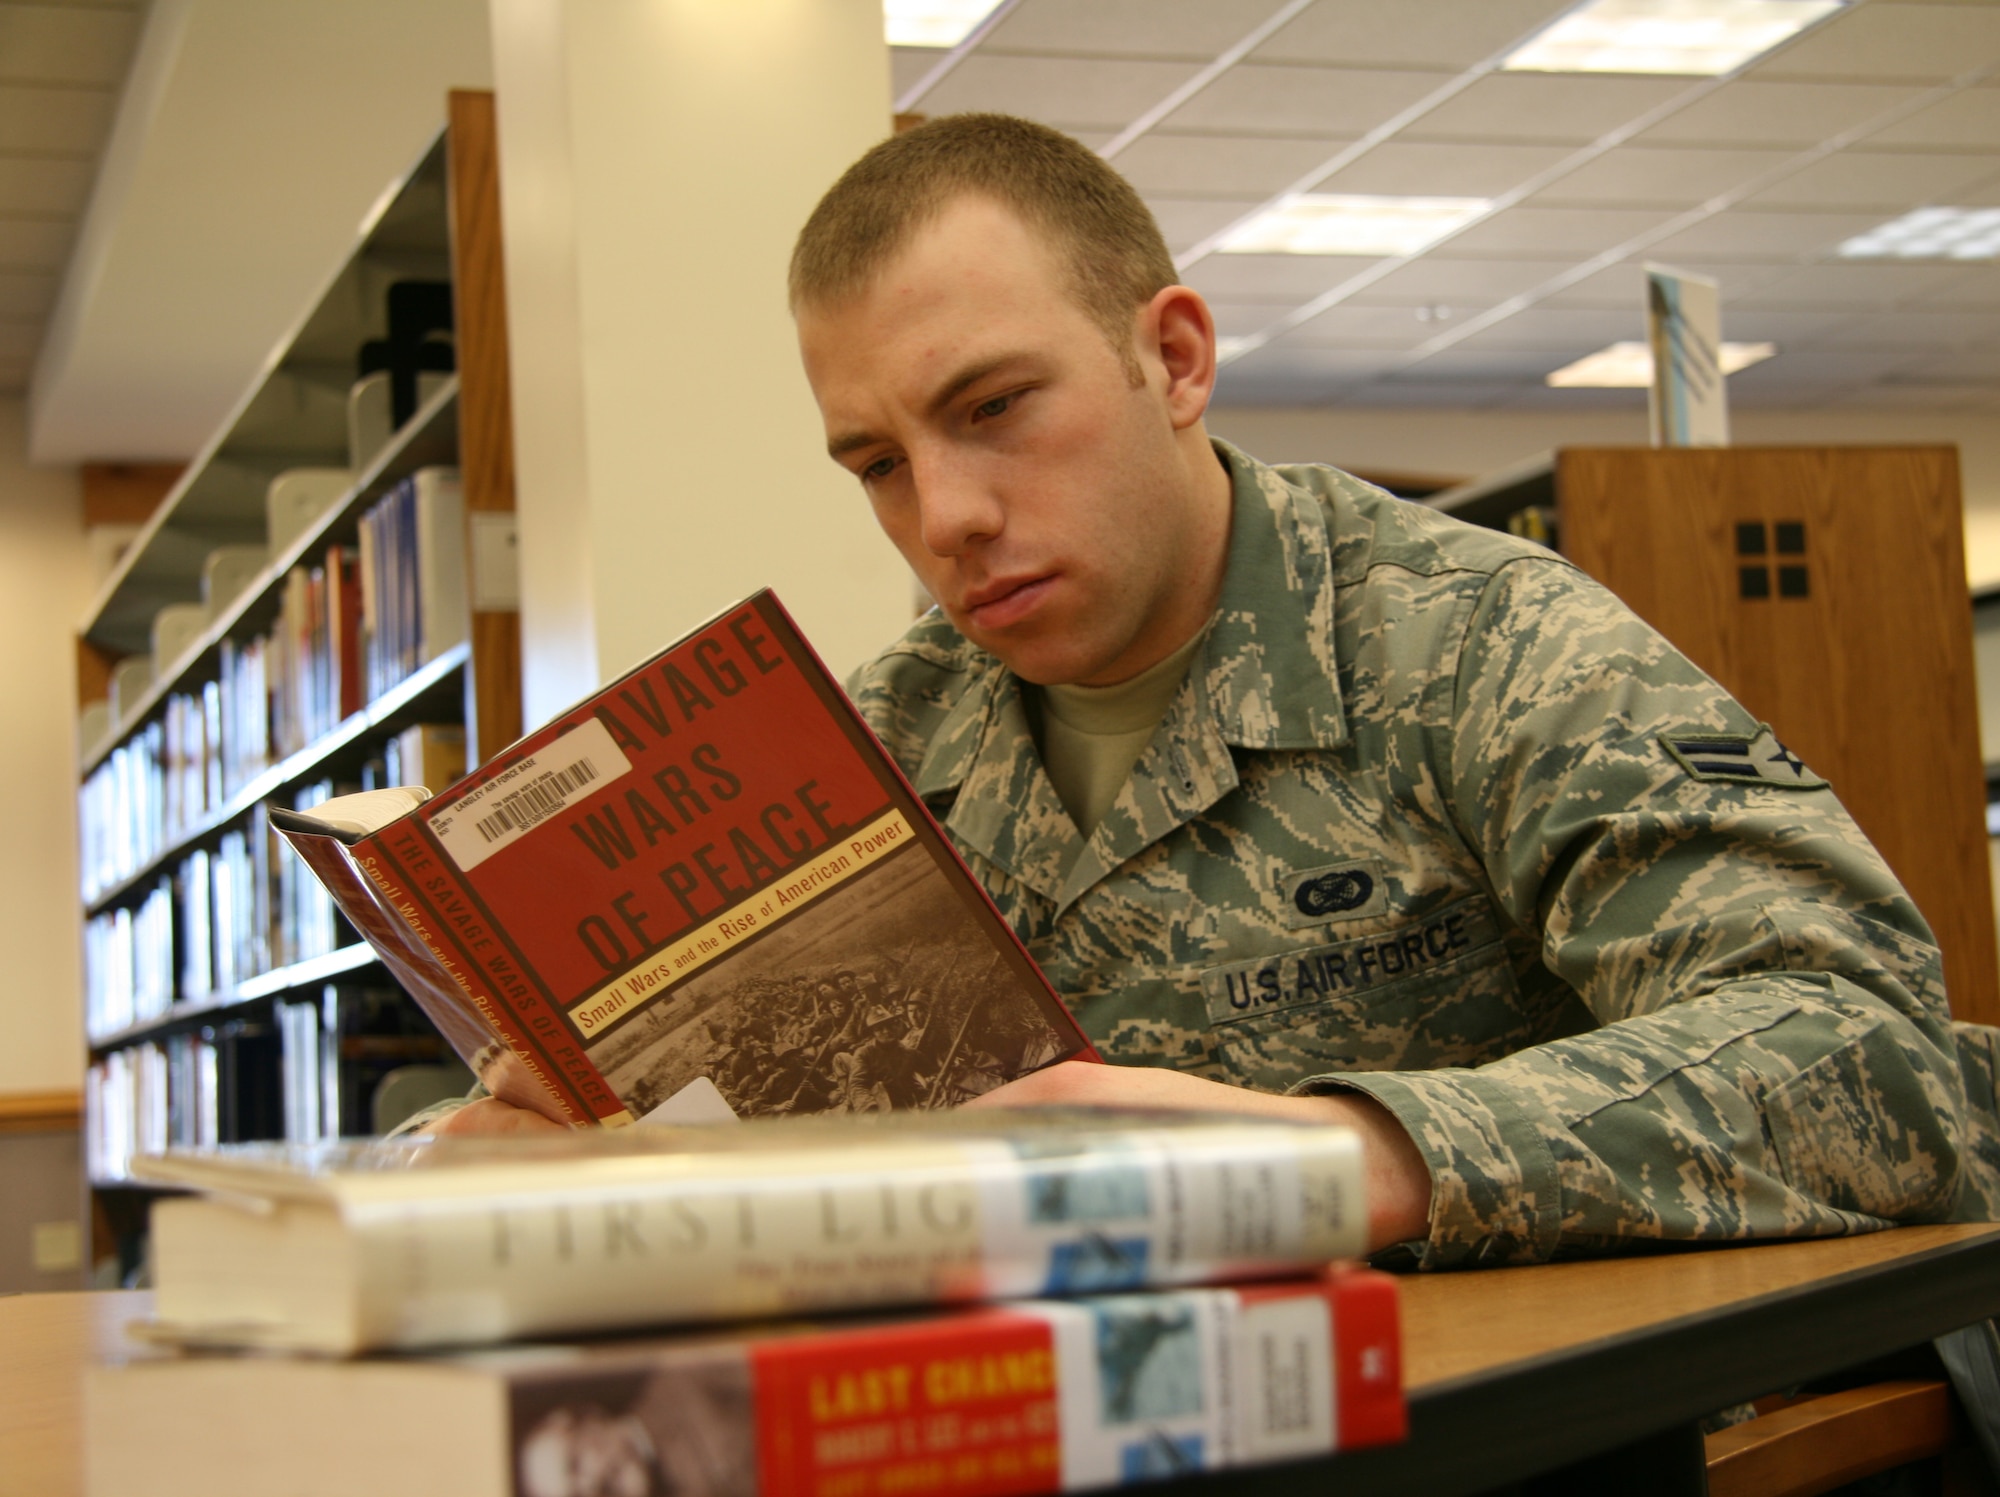 Airman First Class Zachary Vaughn, Air Combat Command, reads a book from the Chief of Staff's 2009 reading list at the Bateman Library, Langley Air Force Base, Va.  Gen. Norton Schwartz carefully selected the twelve books that make up this year's list because they contribute to an Airman's professional development, which is one of his key priorities.  ACC Airmen can check to see if their library has these books available at: http://accc.sirsi.net/uhtbin/cgisirsi/x/x/0/49 (U.S. Air Force photo by Master Sgt. Steven Goetsch)